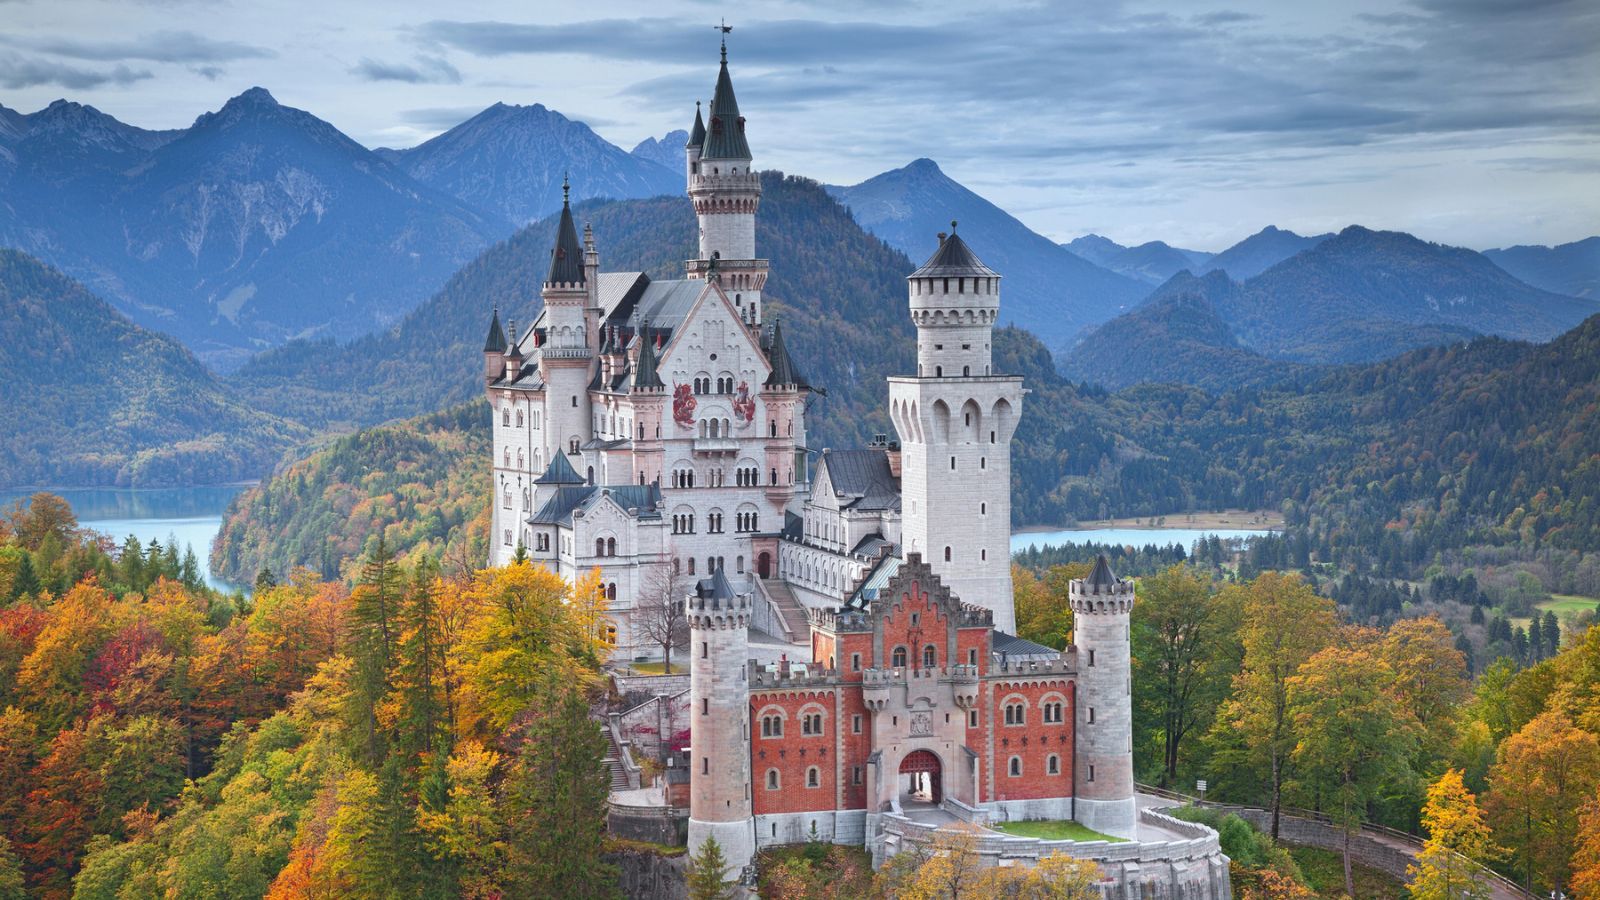 <p>Europe is packed with stunning architecture that can really catch anyone off guard. Imagine stepping from the skyscrapers of New York into the shadow of an ancient Gothic cathedral, or trading Los Angeles’ modern sprawl for the narrow, cobblestone streets of a medieval city. This list of 15 architectural wonders will tour you through some of Europe’s most jaw-dropping buildings, from centuries-old palaces and forts to innovative modern designs.</p>